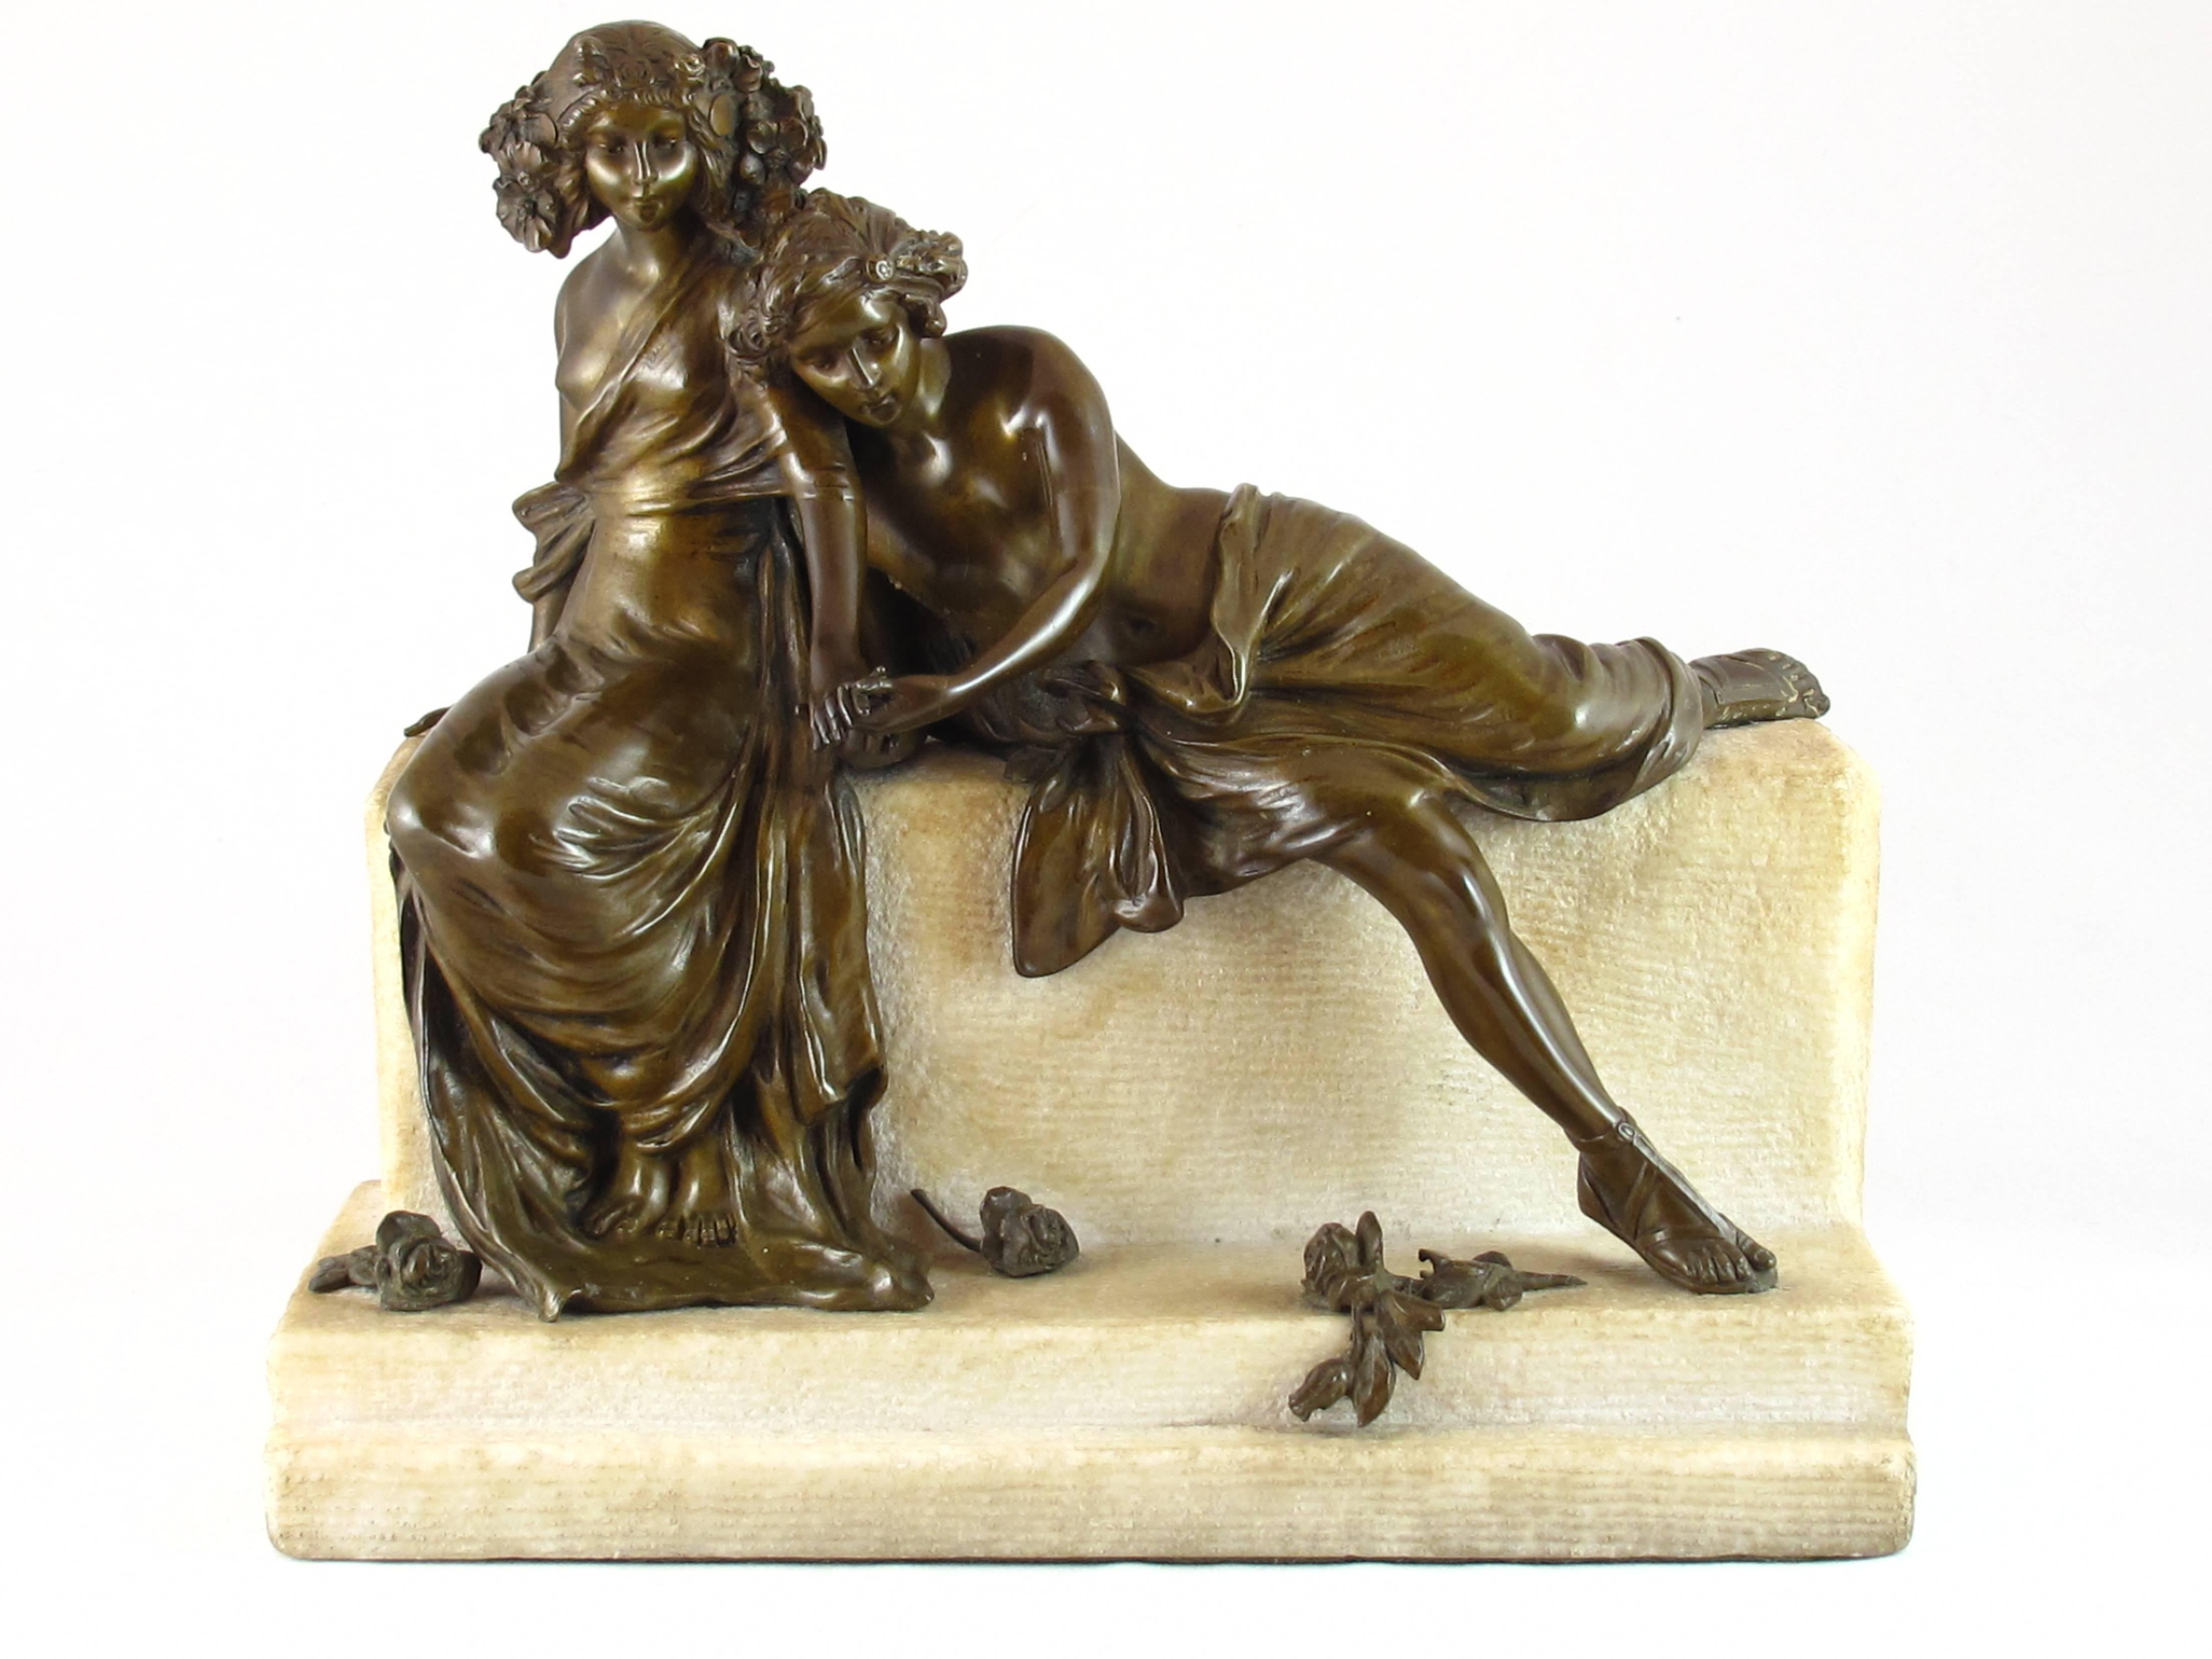 A beautiful Art Nouveau patinated Austrian bronze -The Lovers. Showing a couple seated on a carved marble base. The man is holding the woman by the hand and a ring can be seen on her third finger. Very finely detailed and cast. Signed in the marble